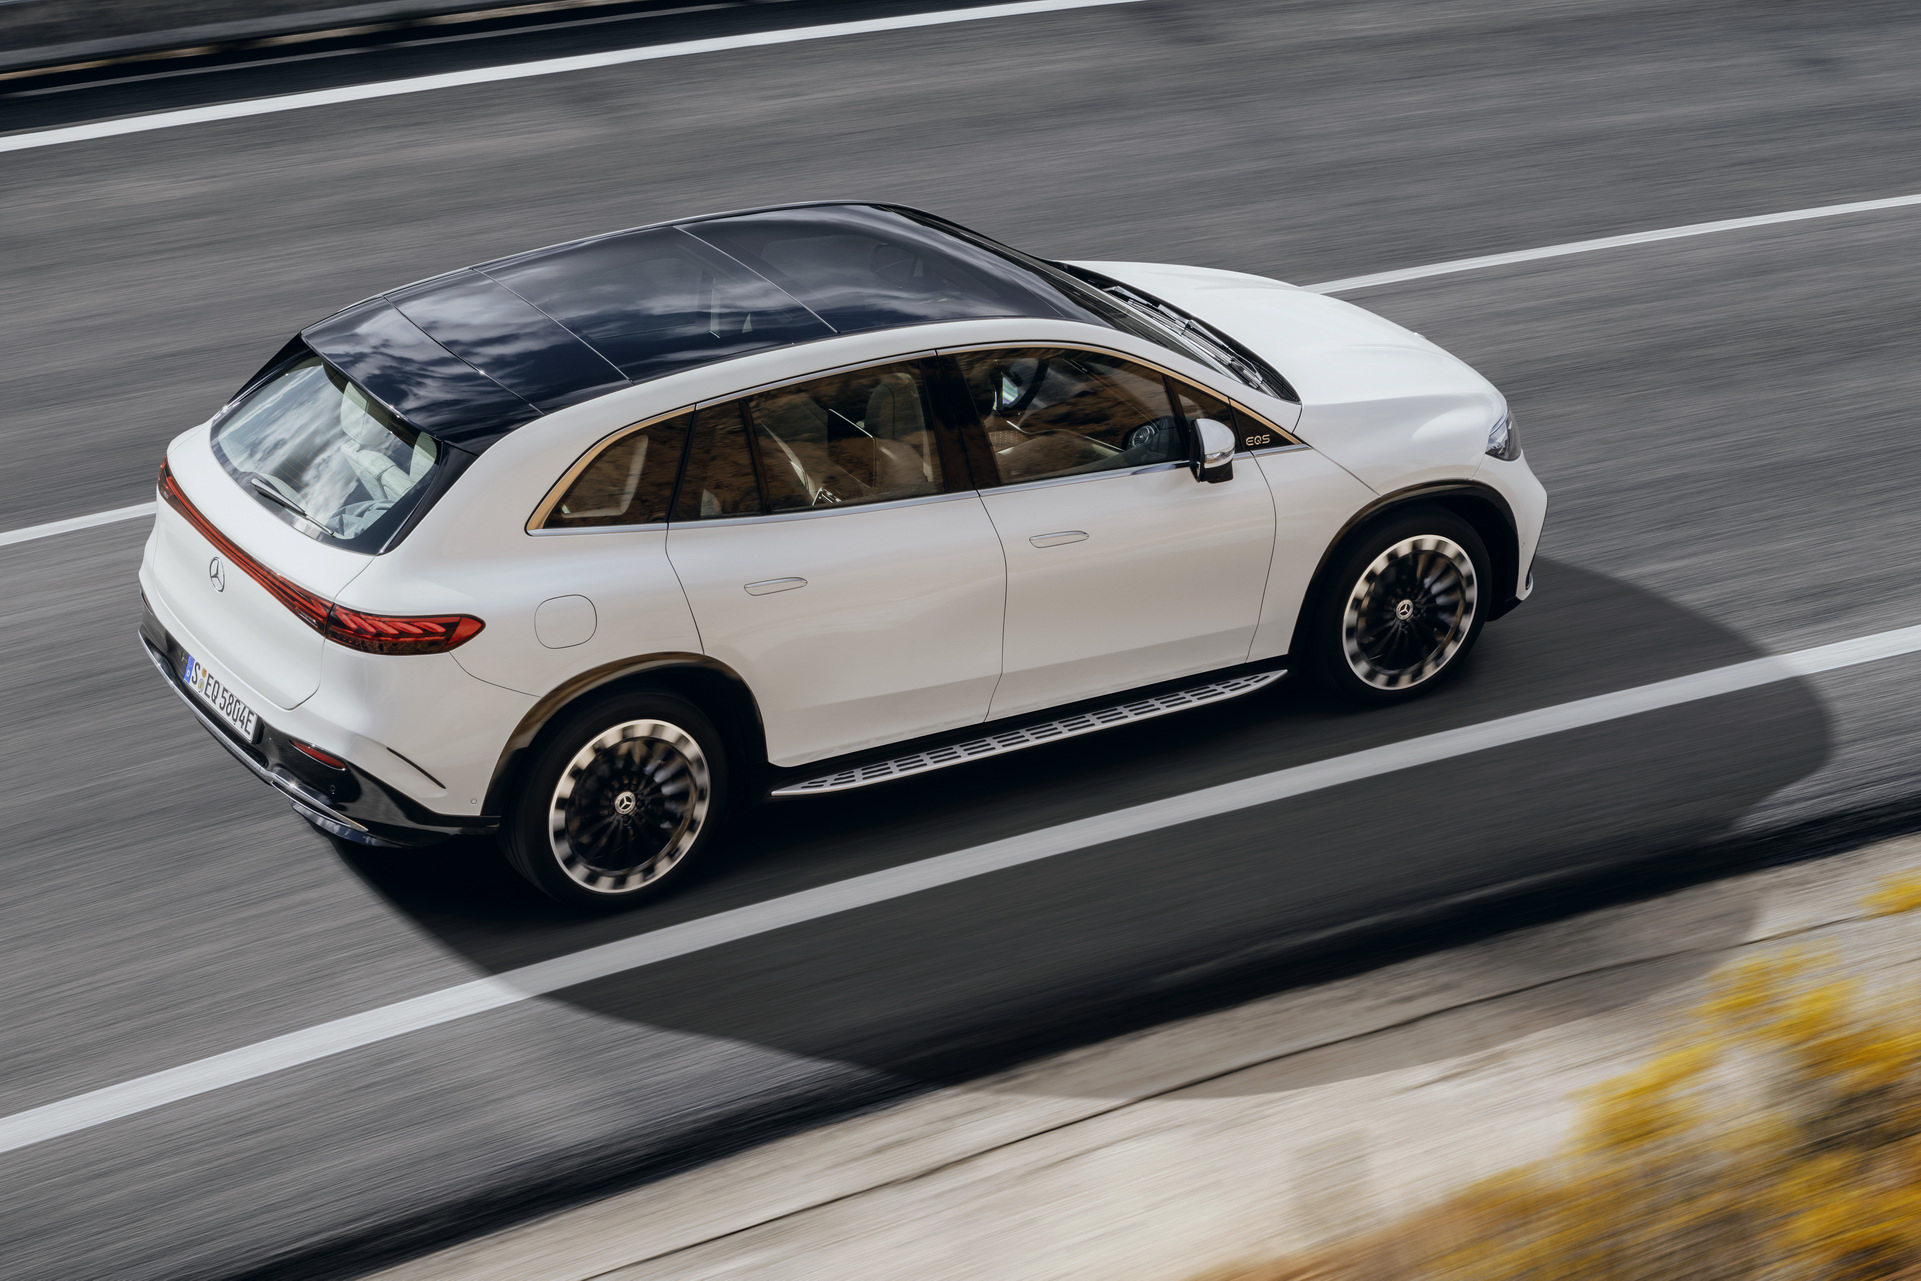 The Mercedes-Benz EQS super product officially has an SUV version - the 'new king' of the electric luxury SUV segment is here - Photo 5.